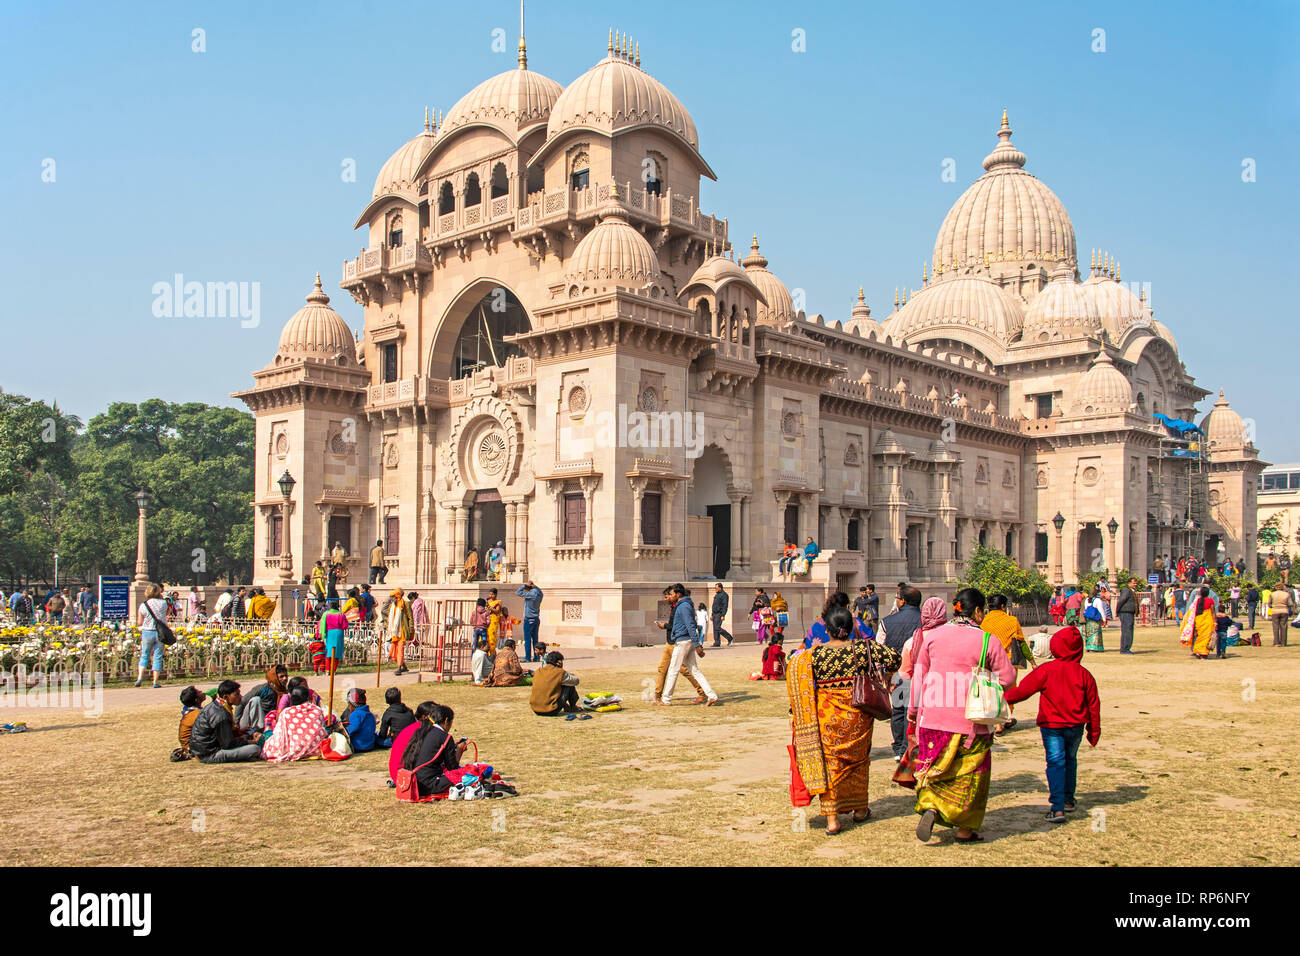 The Belur Math church in Kolkata with tourists and local people walking around and visiting on a sunny day with blue sky. Stock Photo